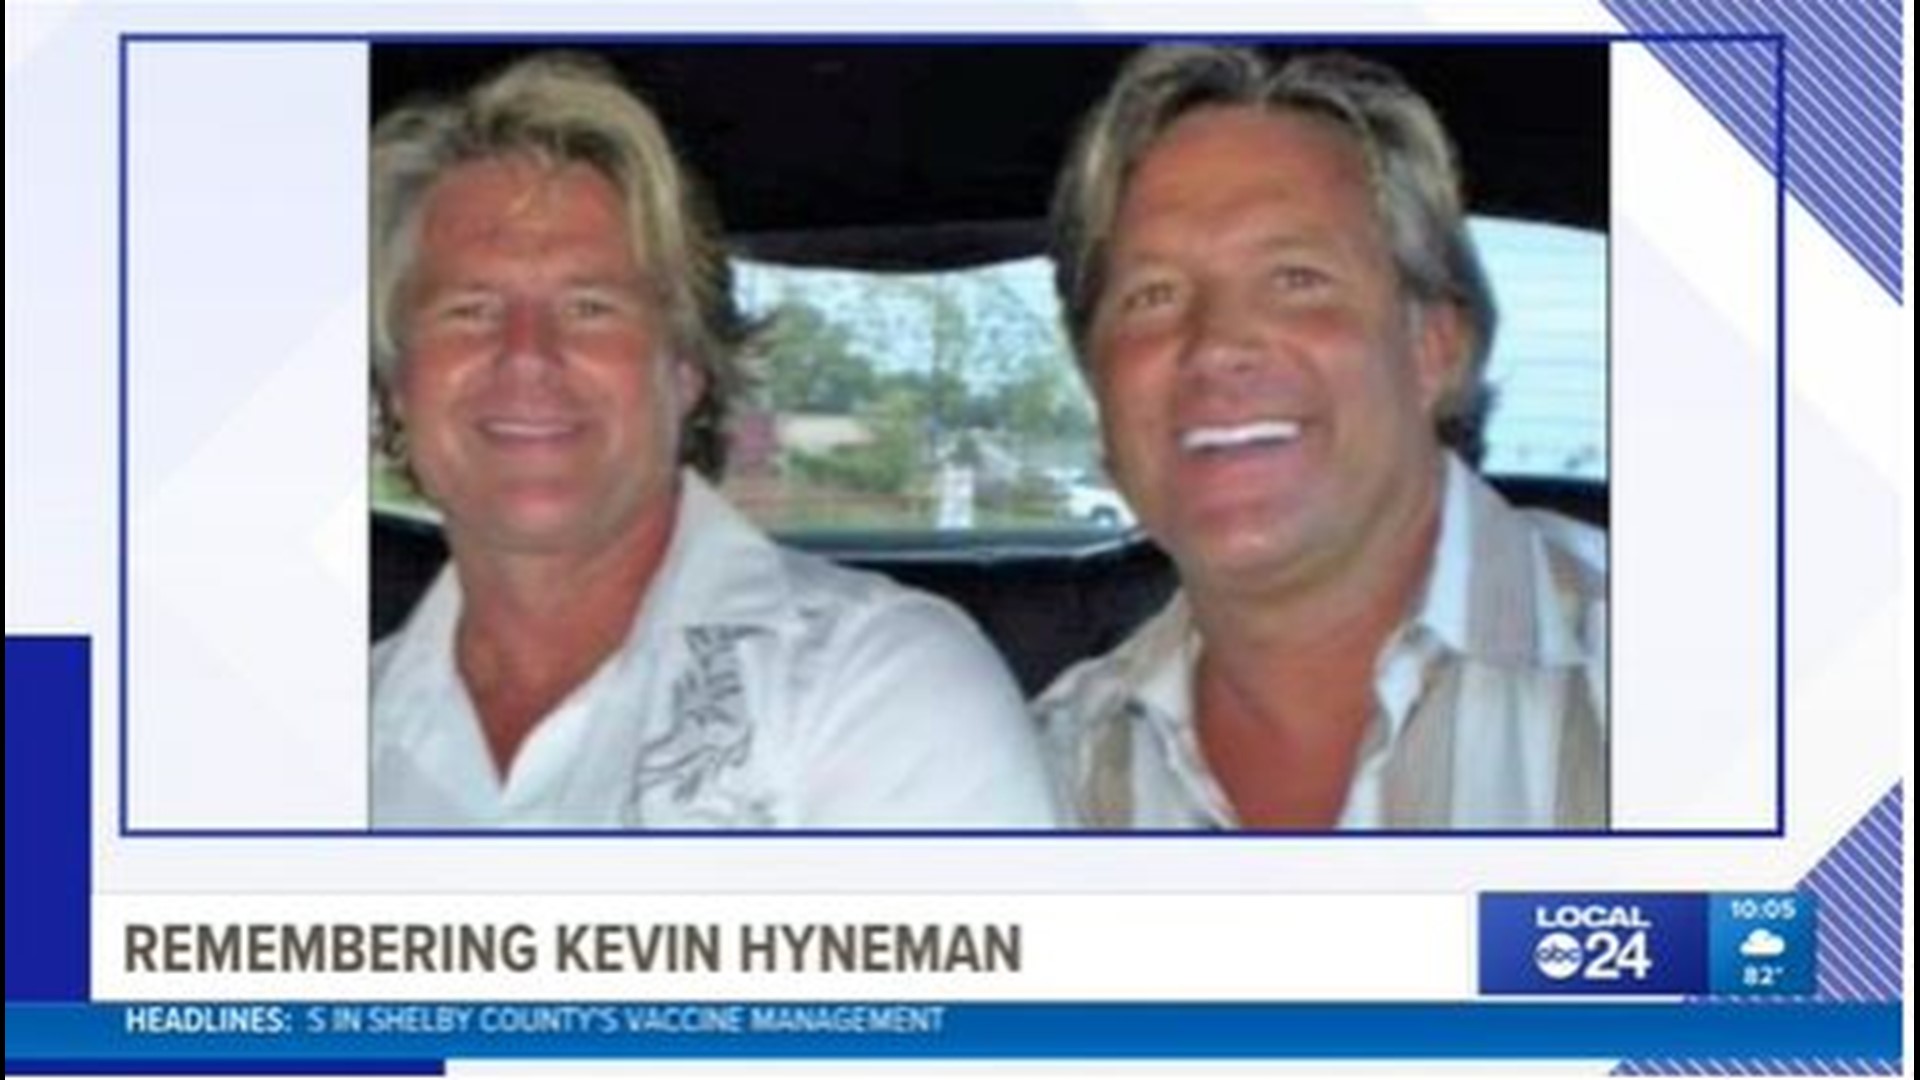 Kevin Hyneman died from a possible heart attack while vacationing in Destin, Florida.